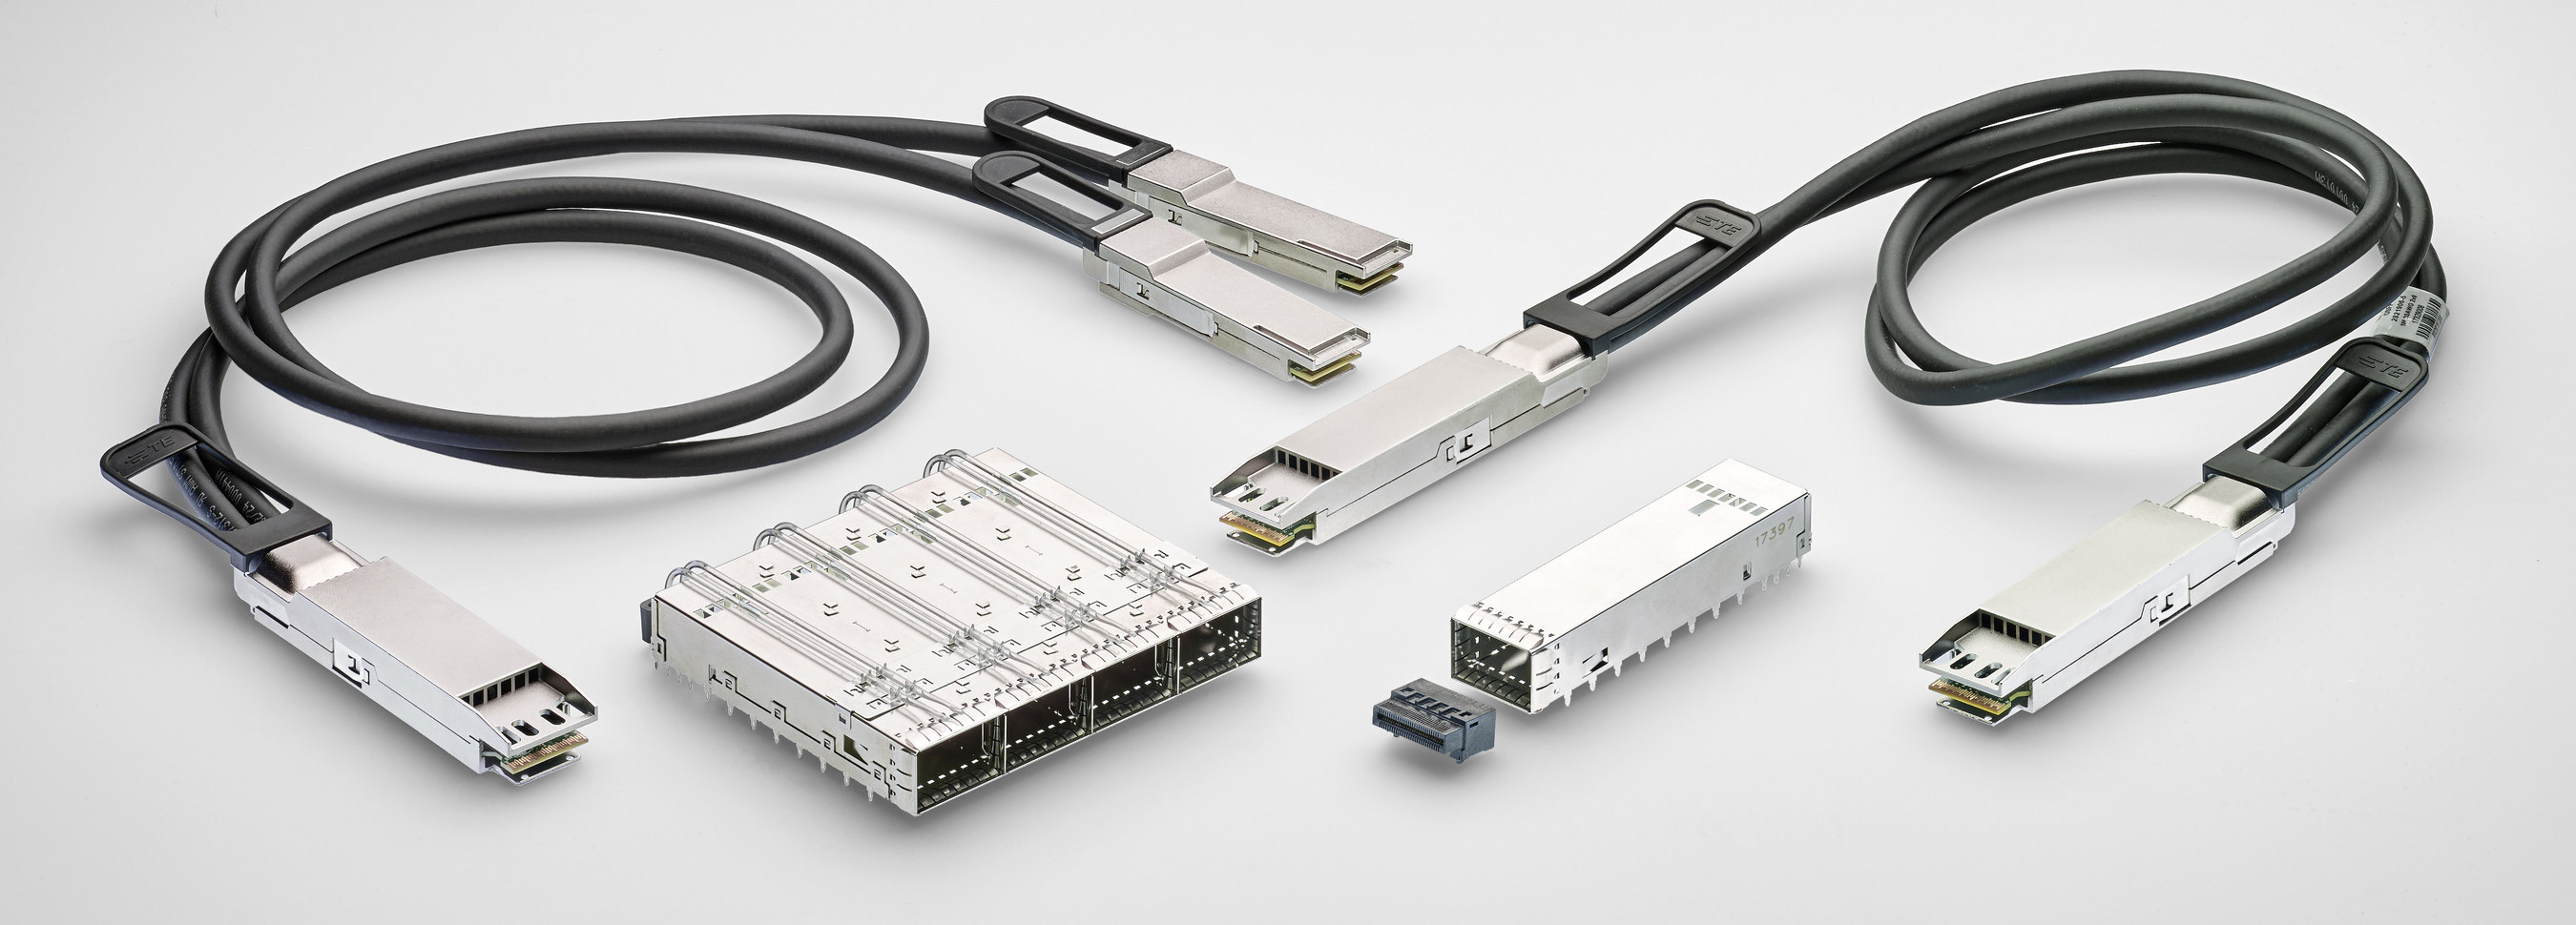 TE Connectivitys latest Octal Small Form Factor Pluggable OSFP connector and cable assembly